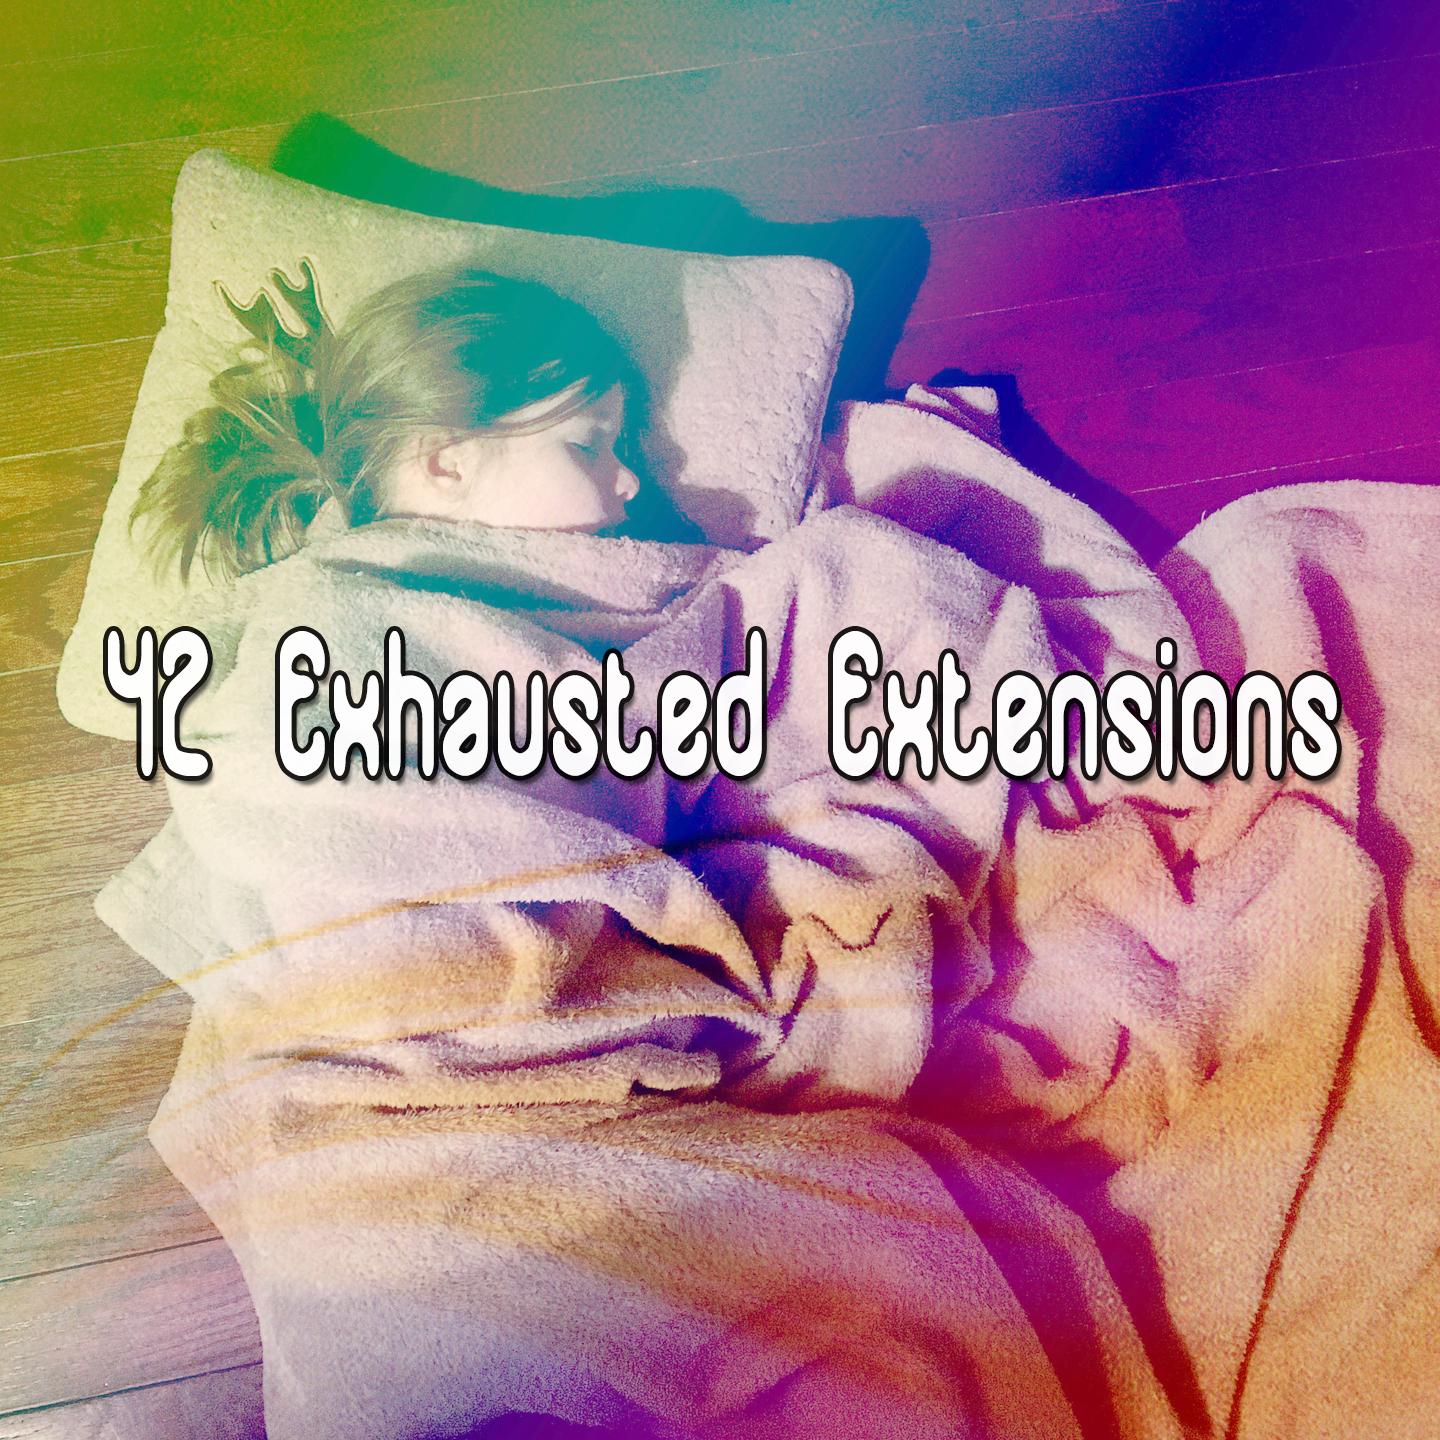 42 Exhausted Extensions